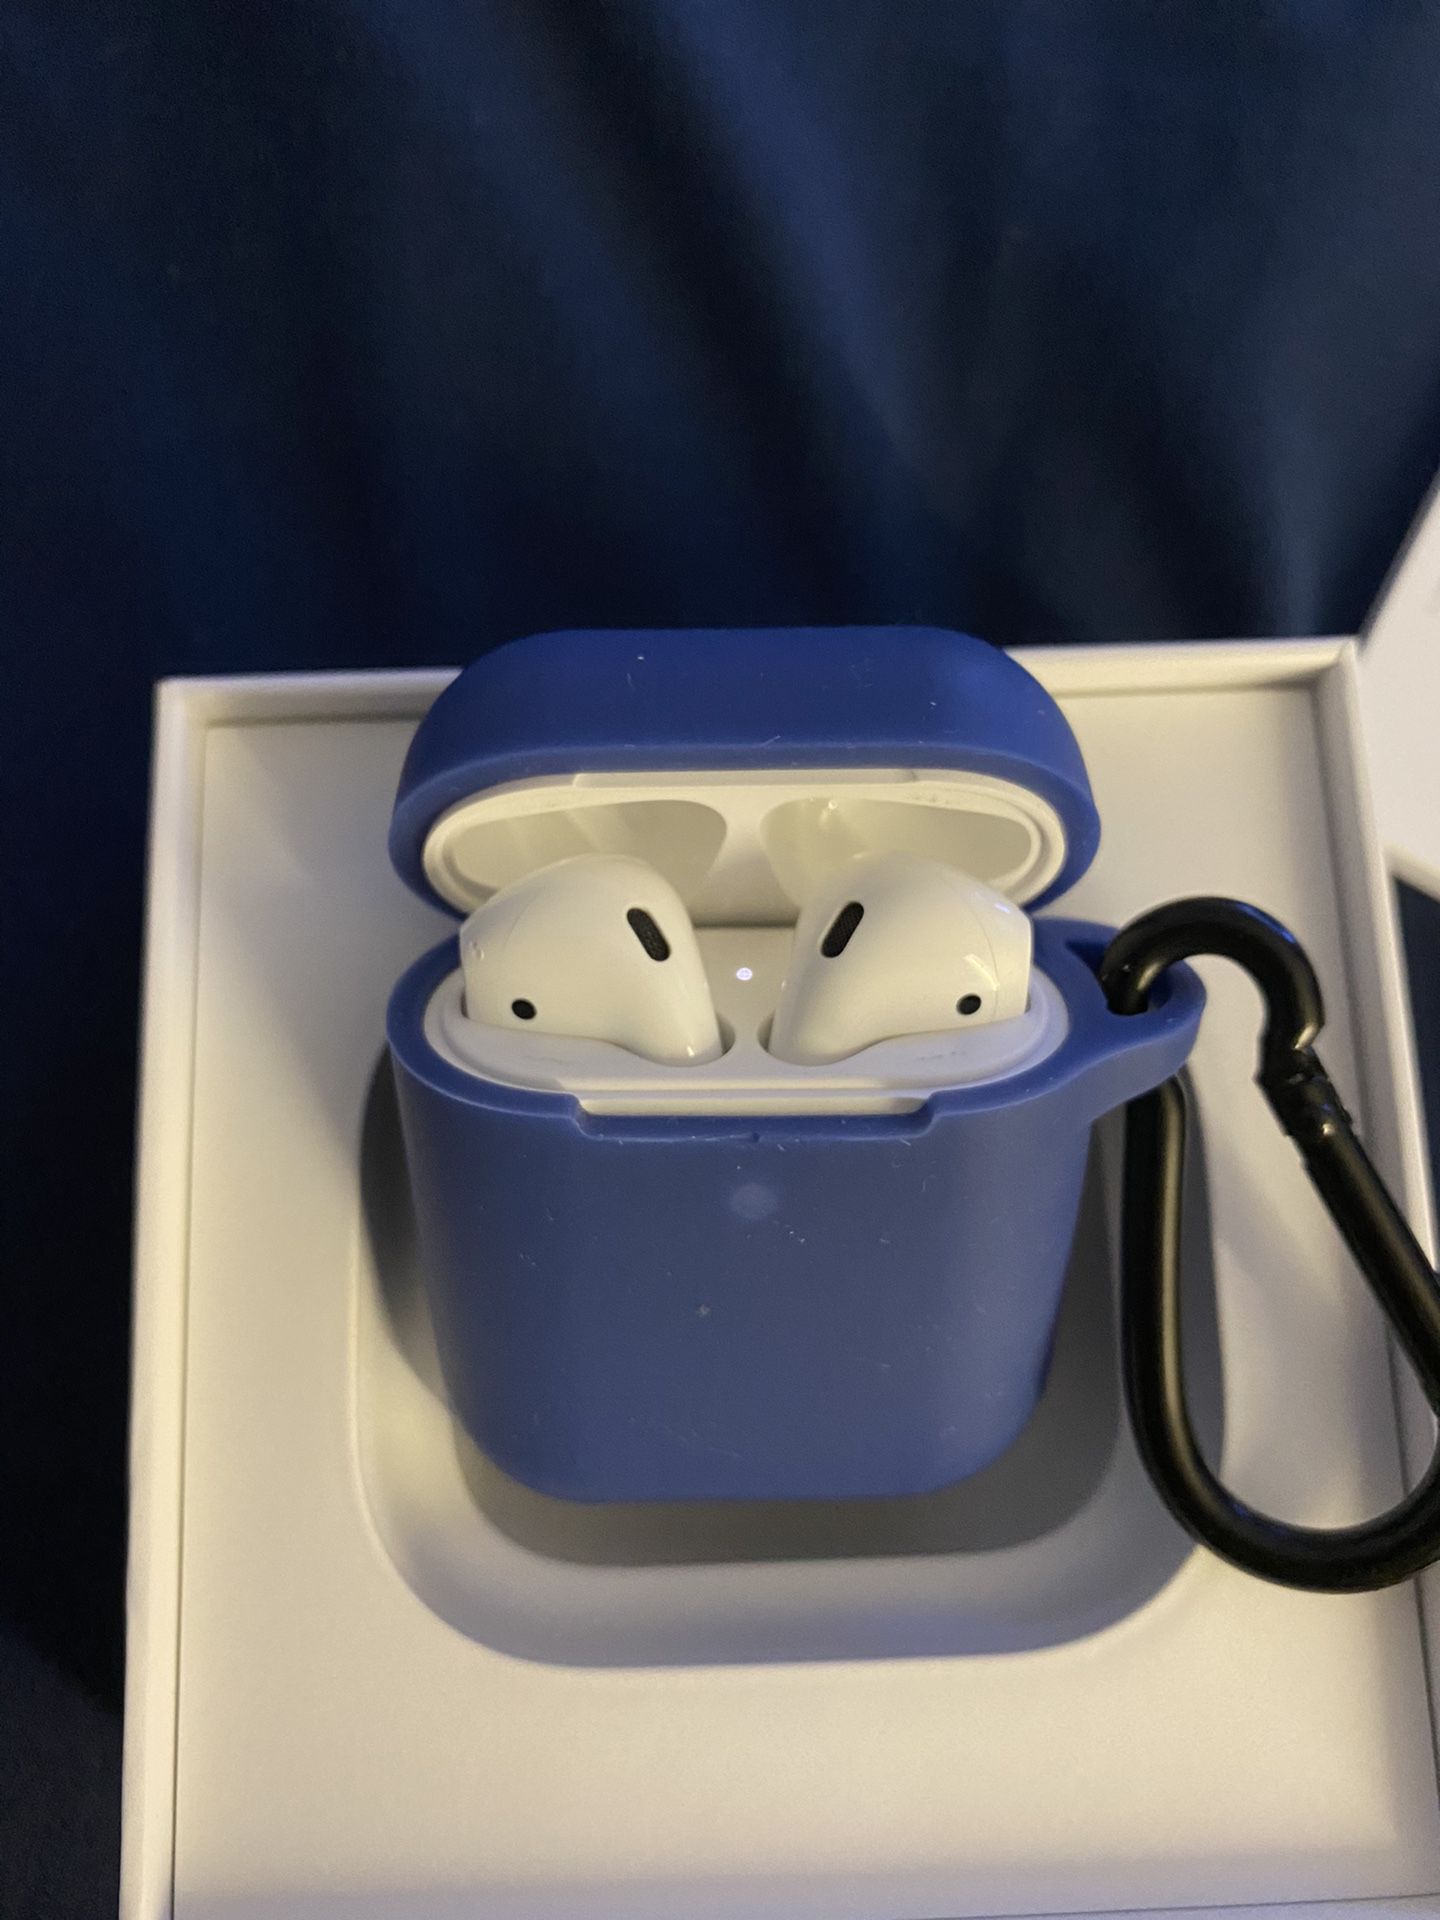 Apple AirPods (Latest Model) with charging case /White